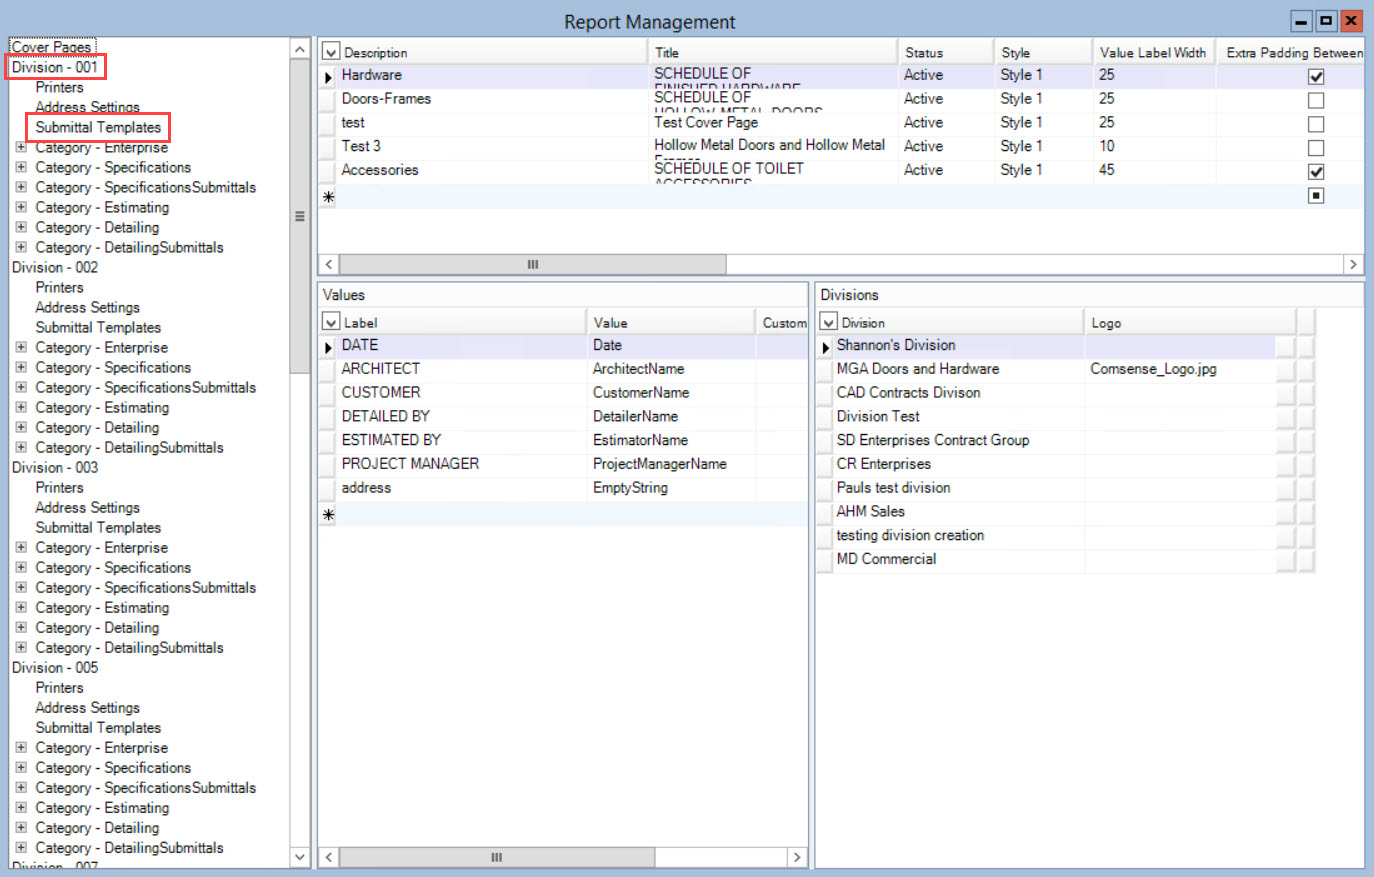 Report Management window; shows the location of the Division headers and Submittal Templates.